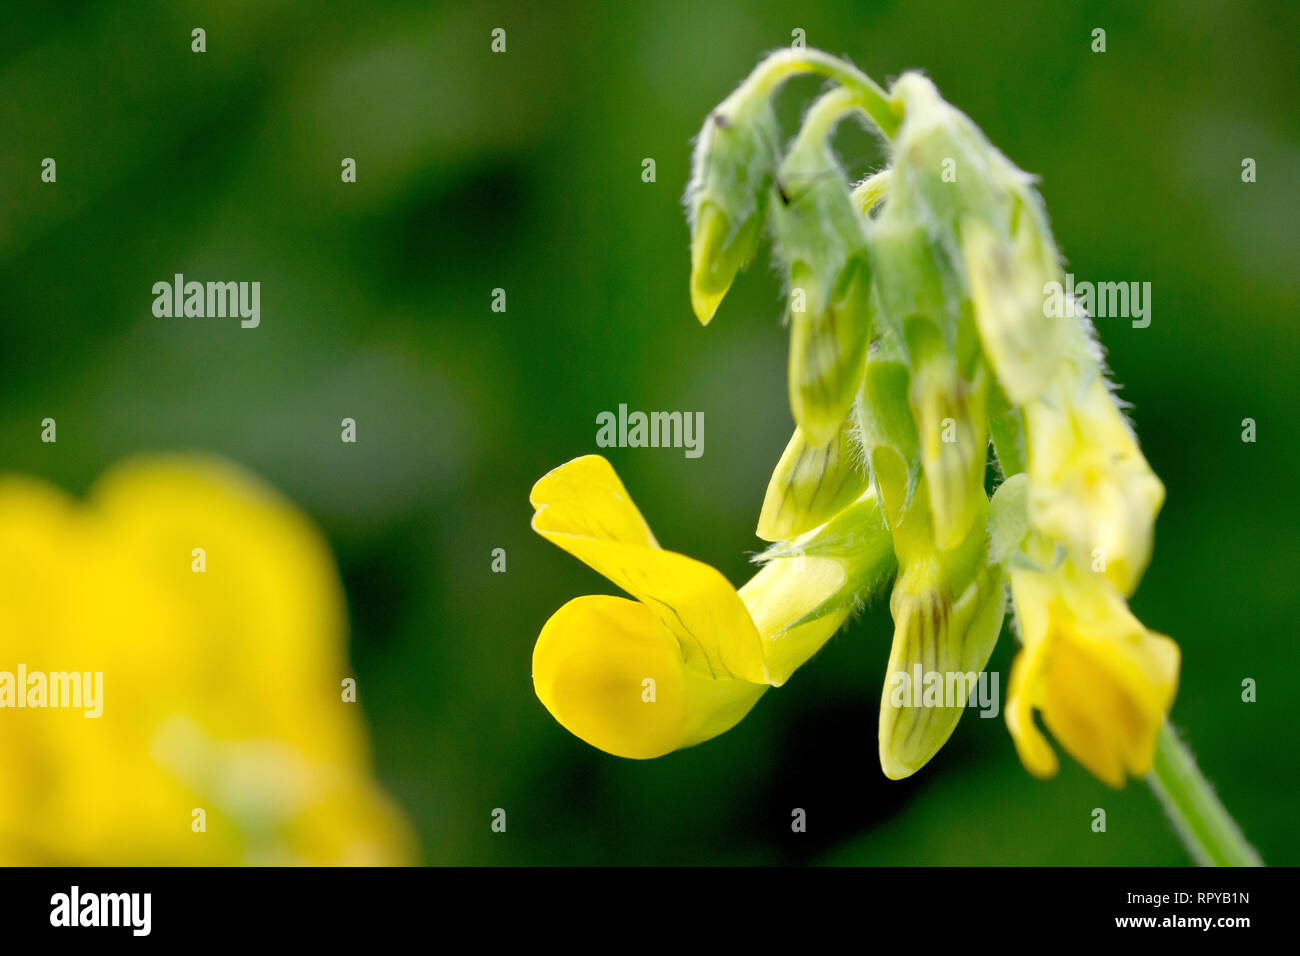 Meadow Vetchling (lathyrus pratensis), close up of a solitary flower head just beginning to flower. Stock Photo